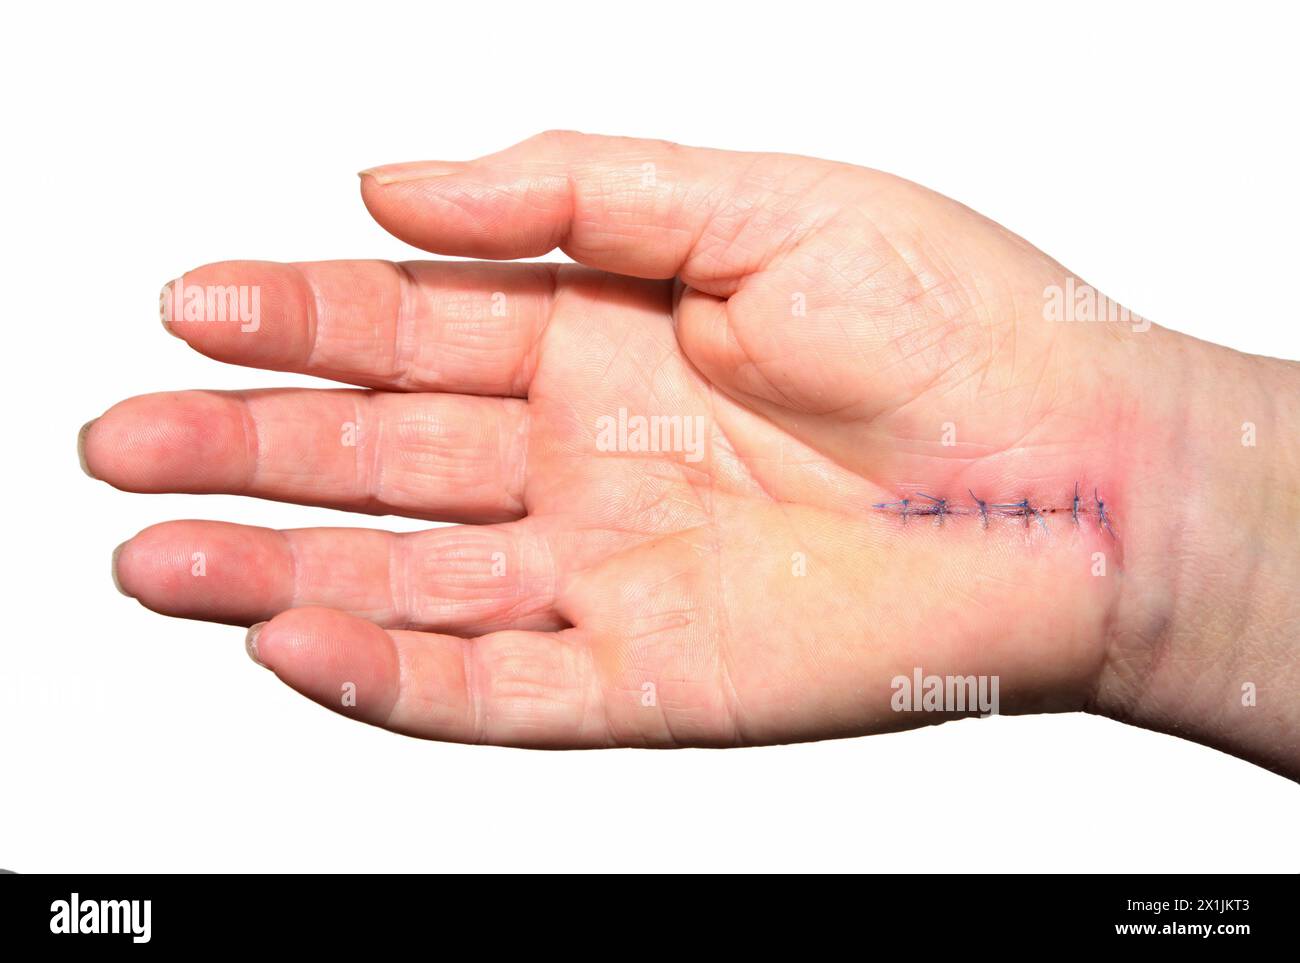 Operation repaire stitches of Carpal Tunnel Syndrome relief surgery Stock Photo